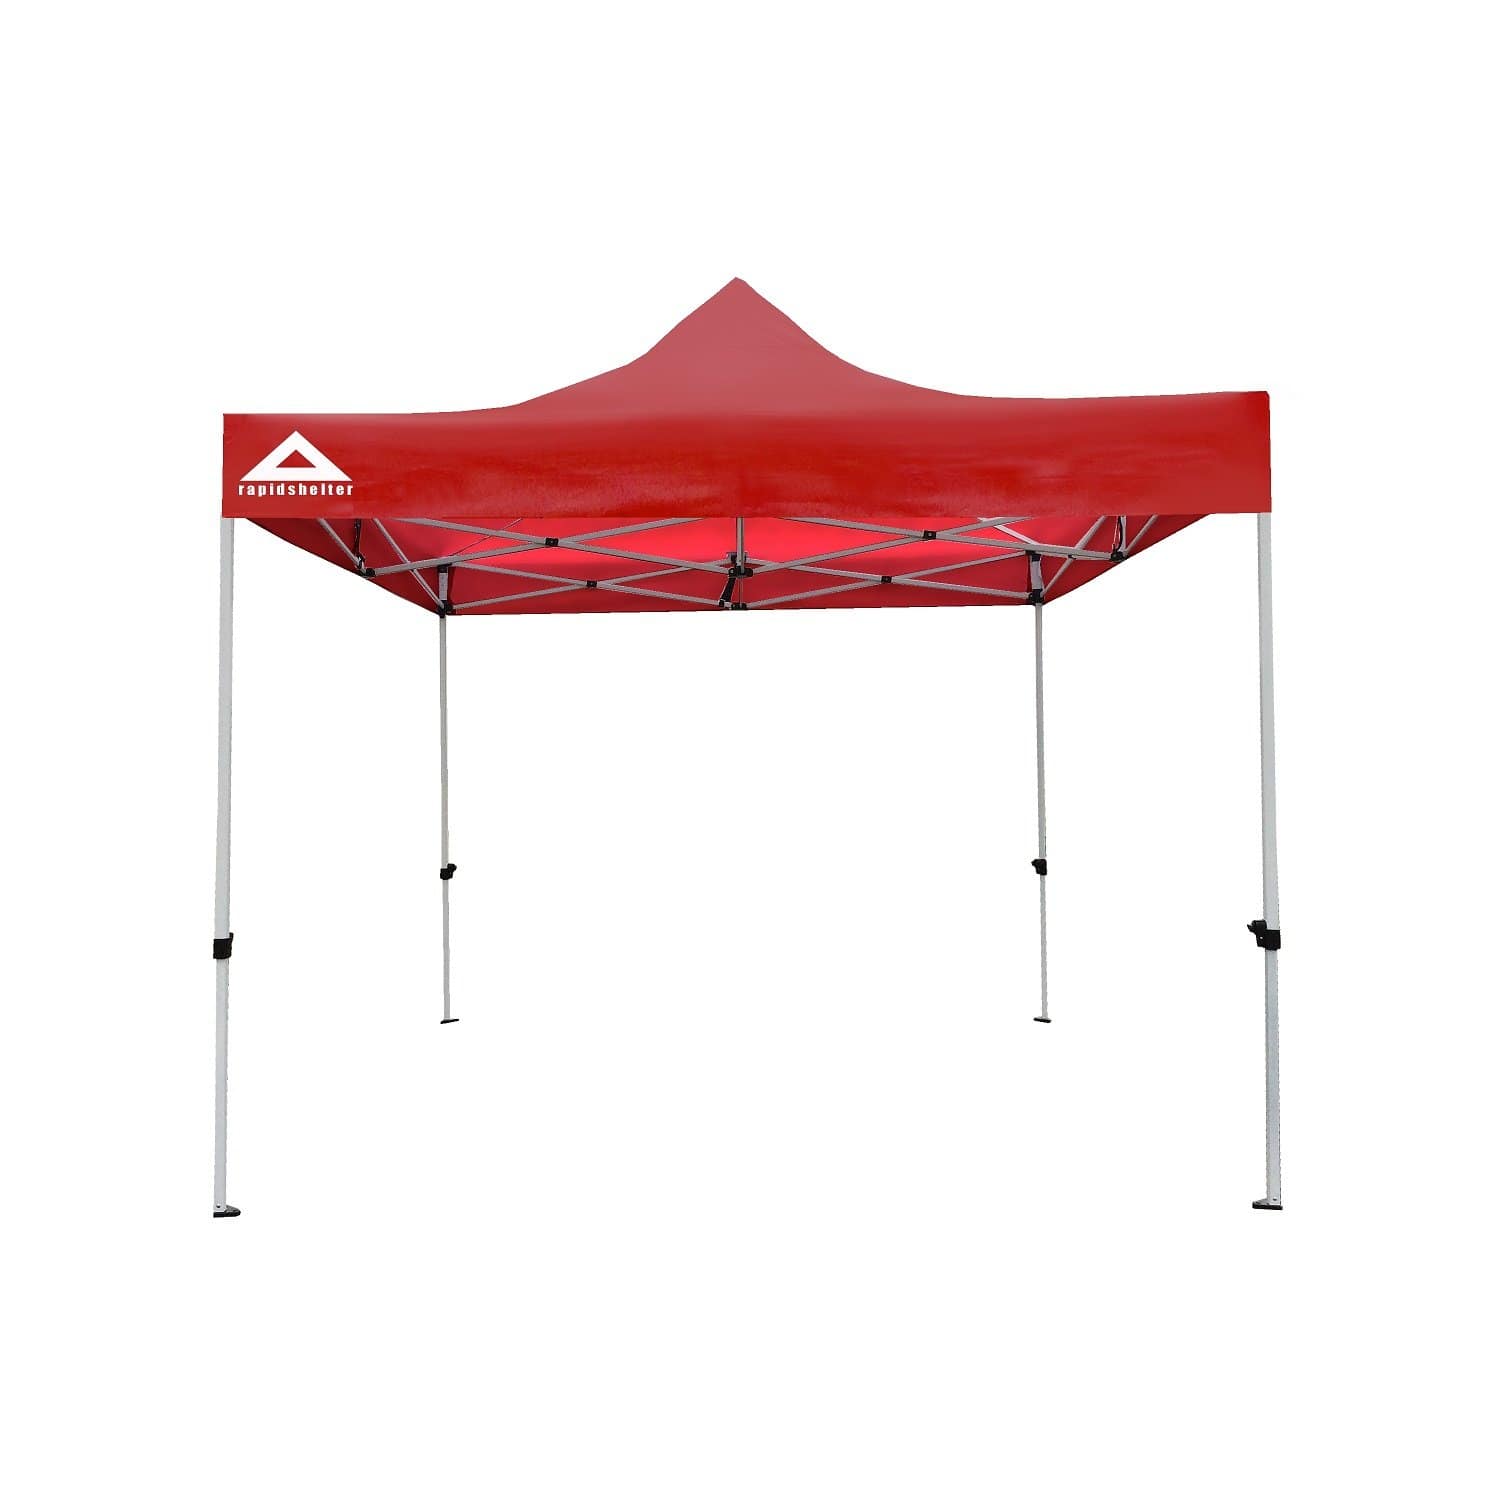 Caddis Sports Camping & Outdoor : Tents Caddis Rapid Shelter Canopy 10x10 Red